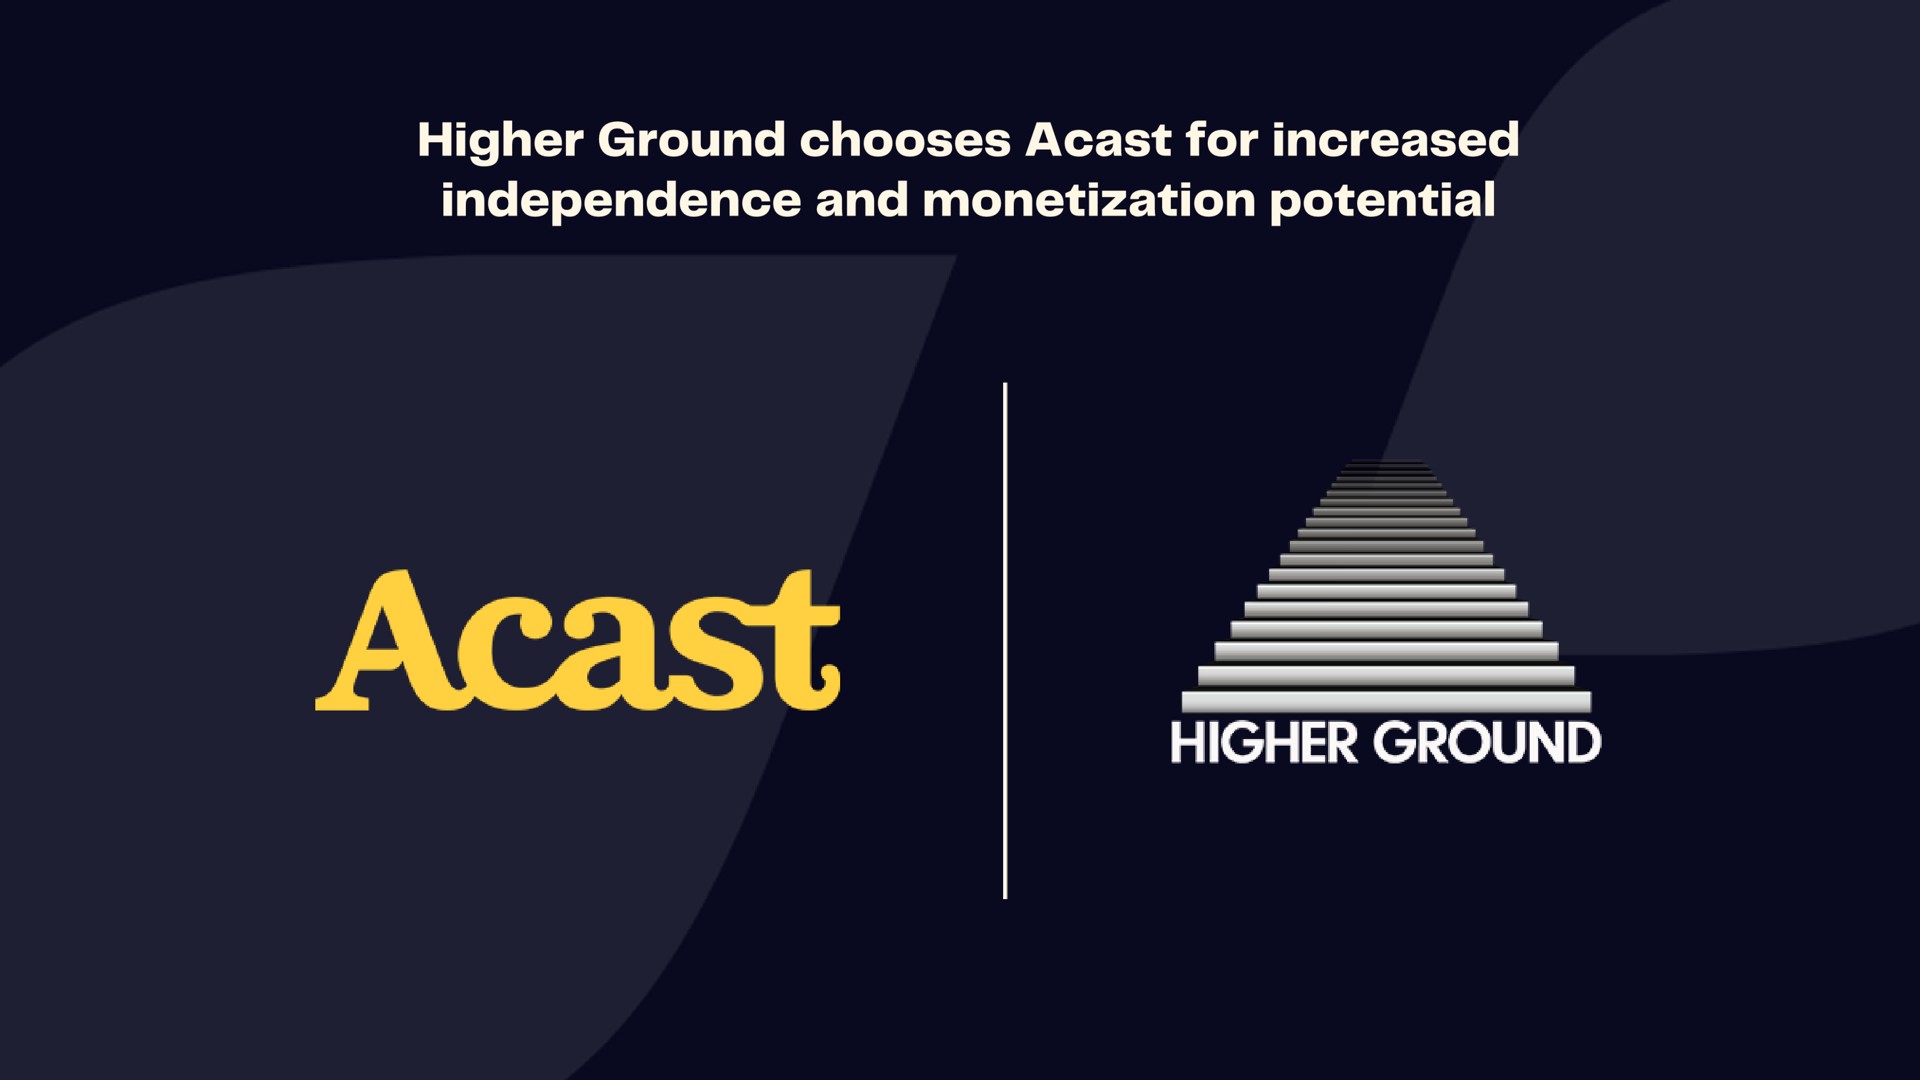 higher ground chooses for increased independence and monetization potential higher ground | Acast